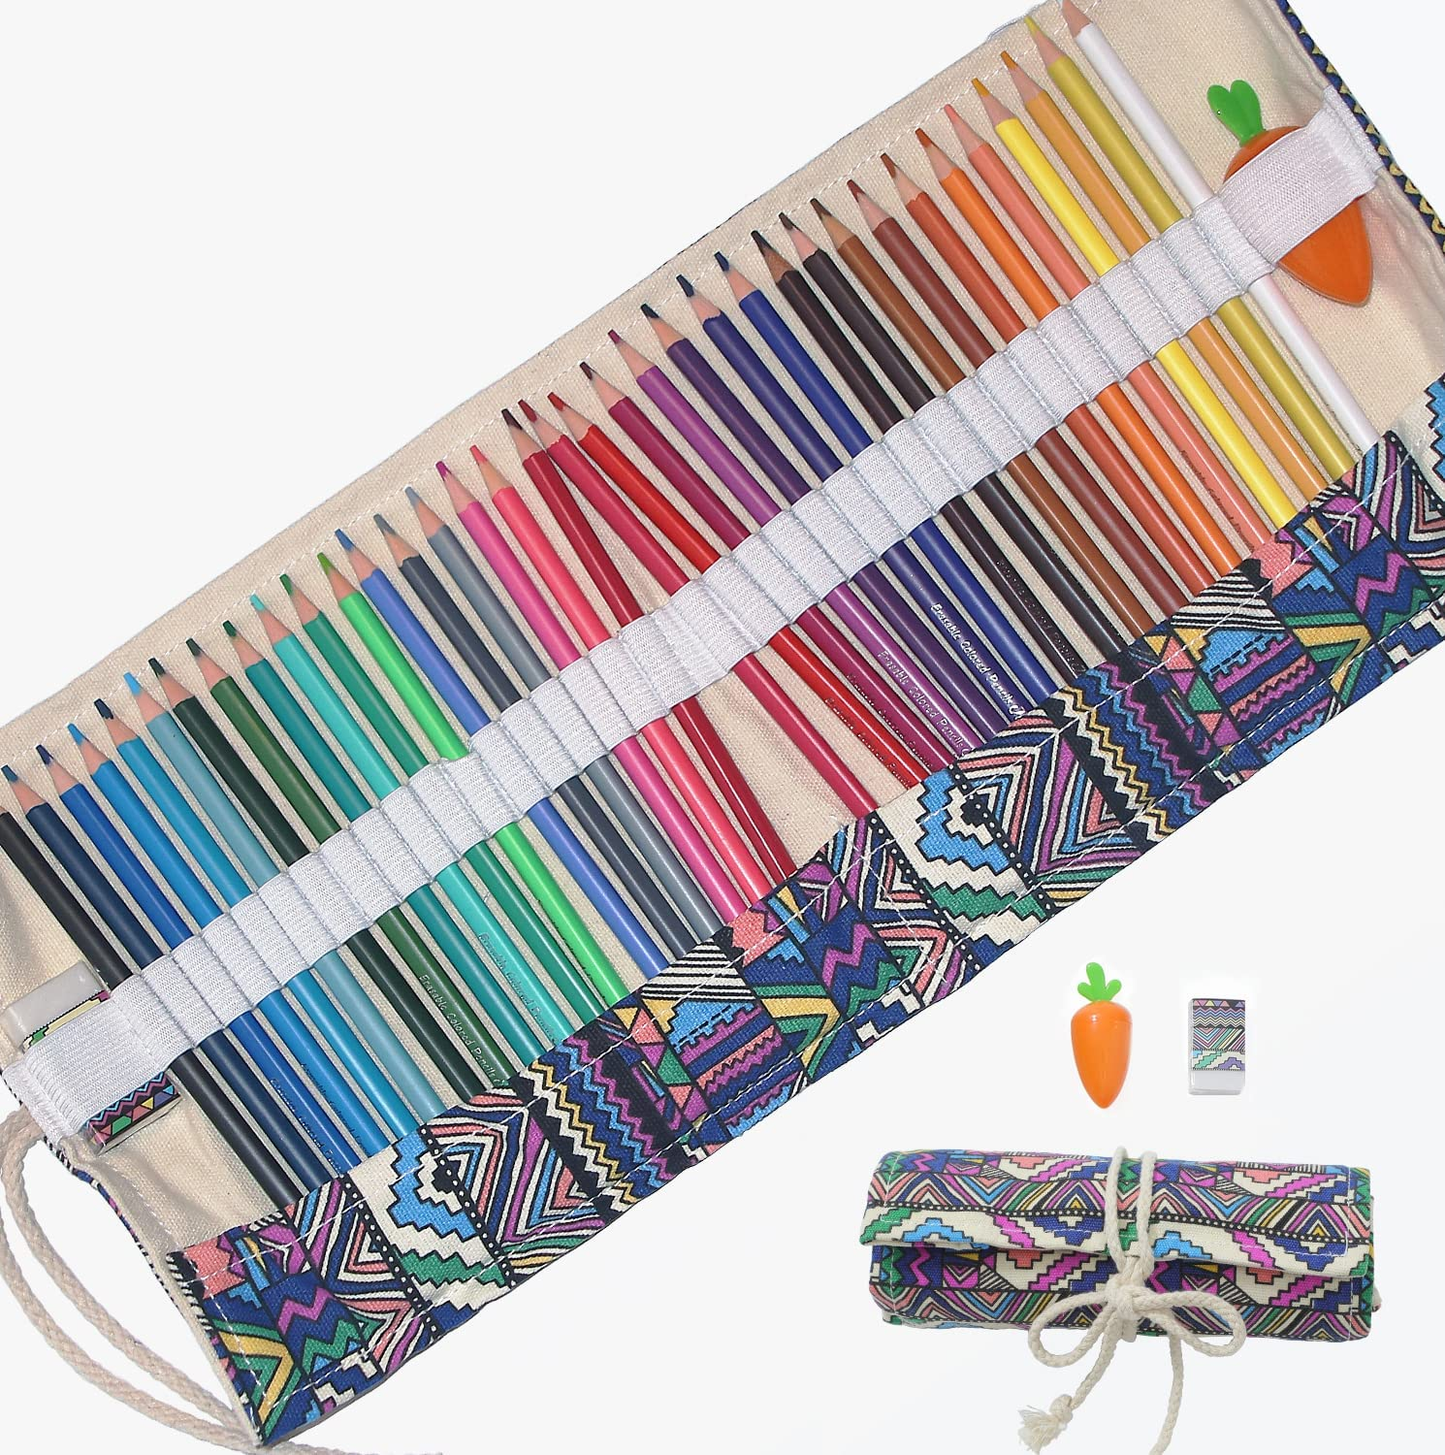 Colored Pencils Set for Adults and Kids Drawing Pencils for Sketch Arts with Eraser Sharpener Canvas Carry Pouch (24-Color)